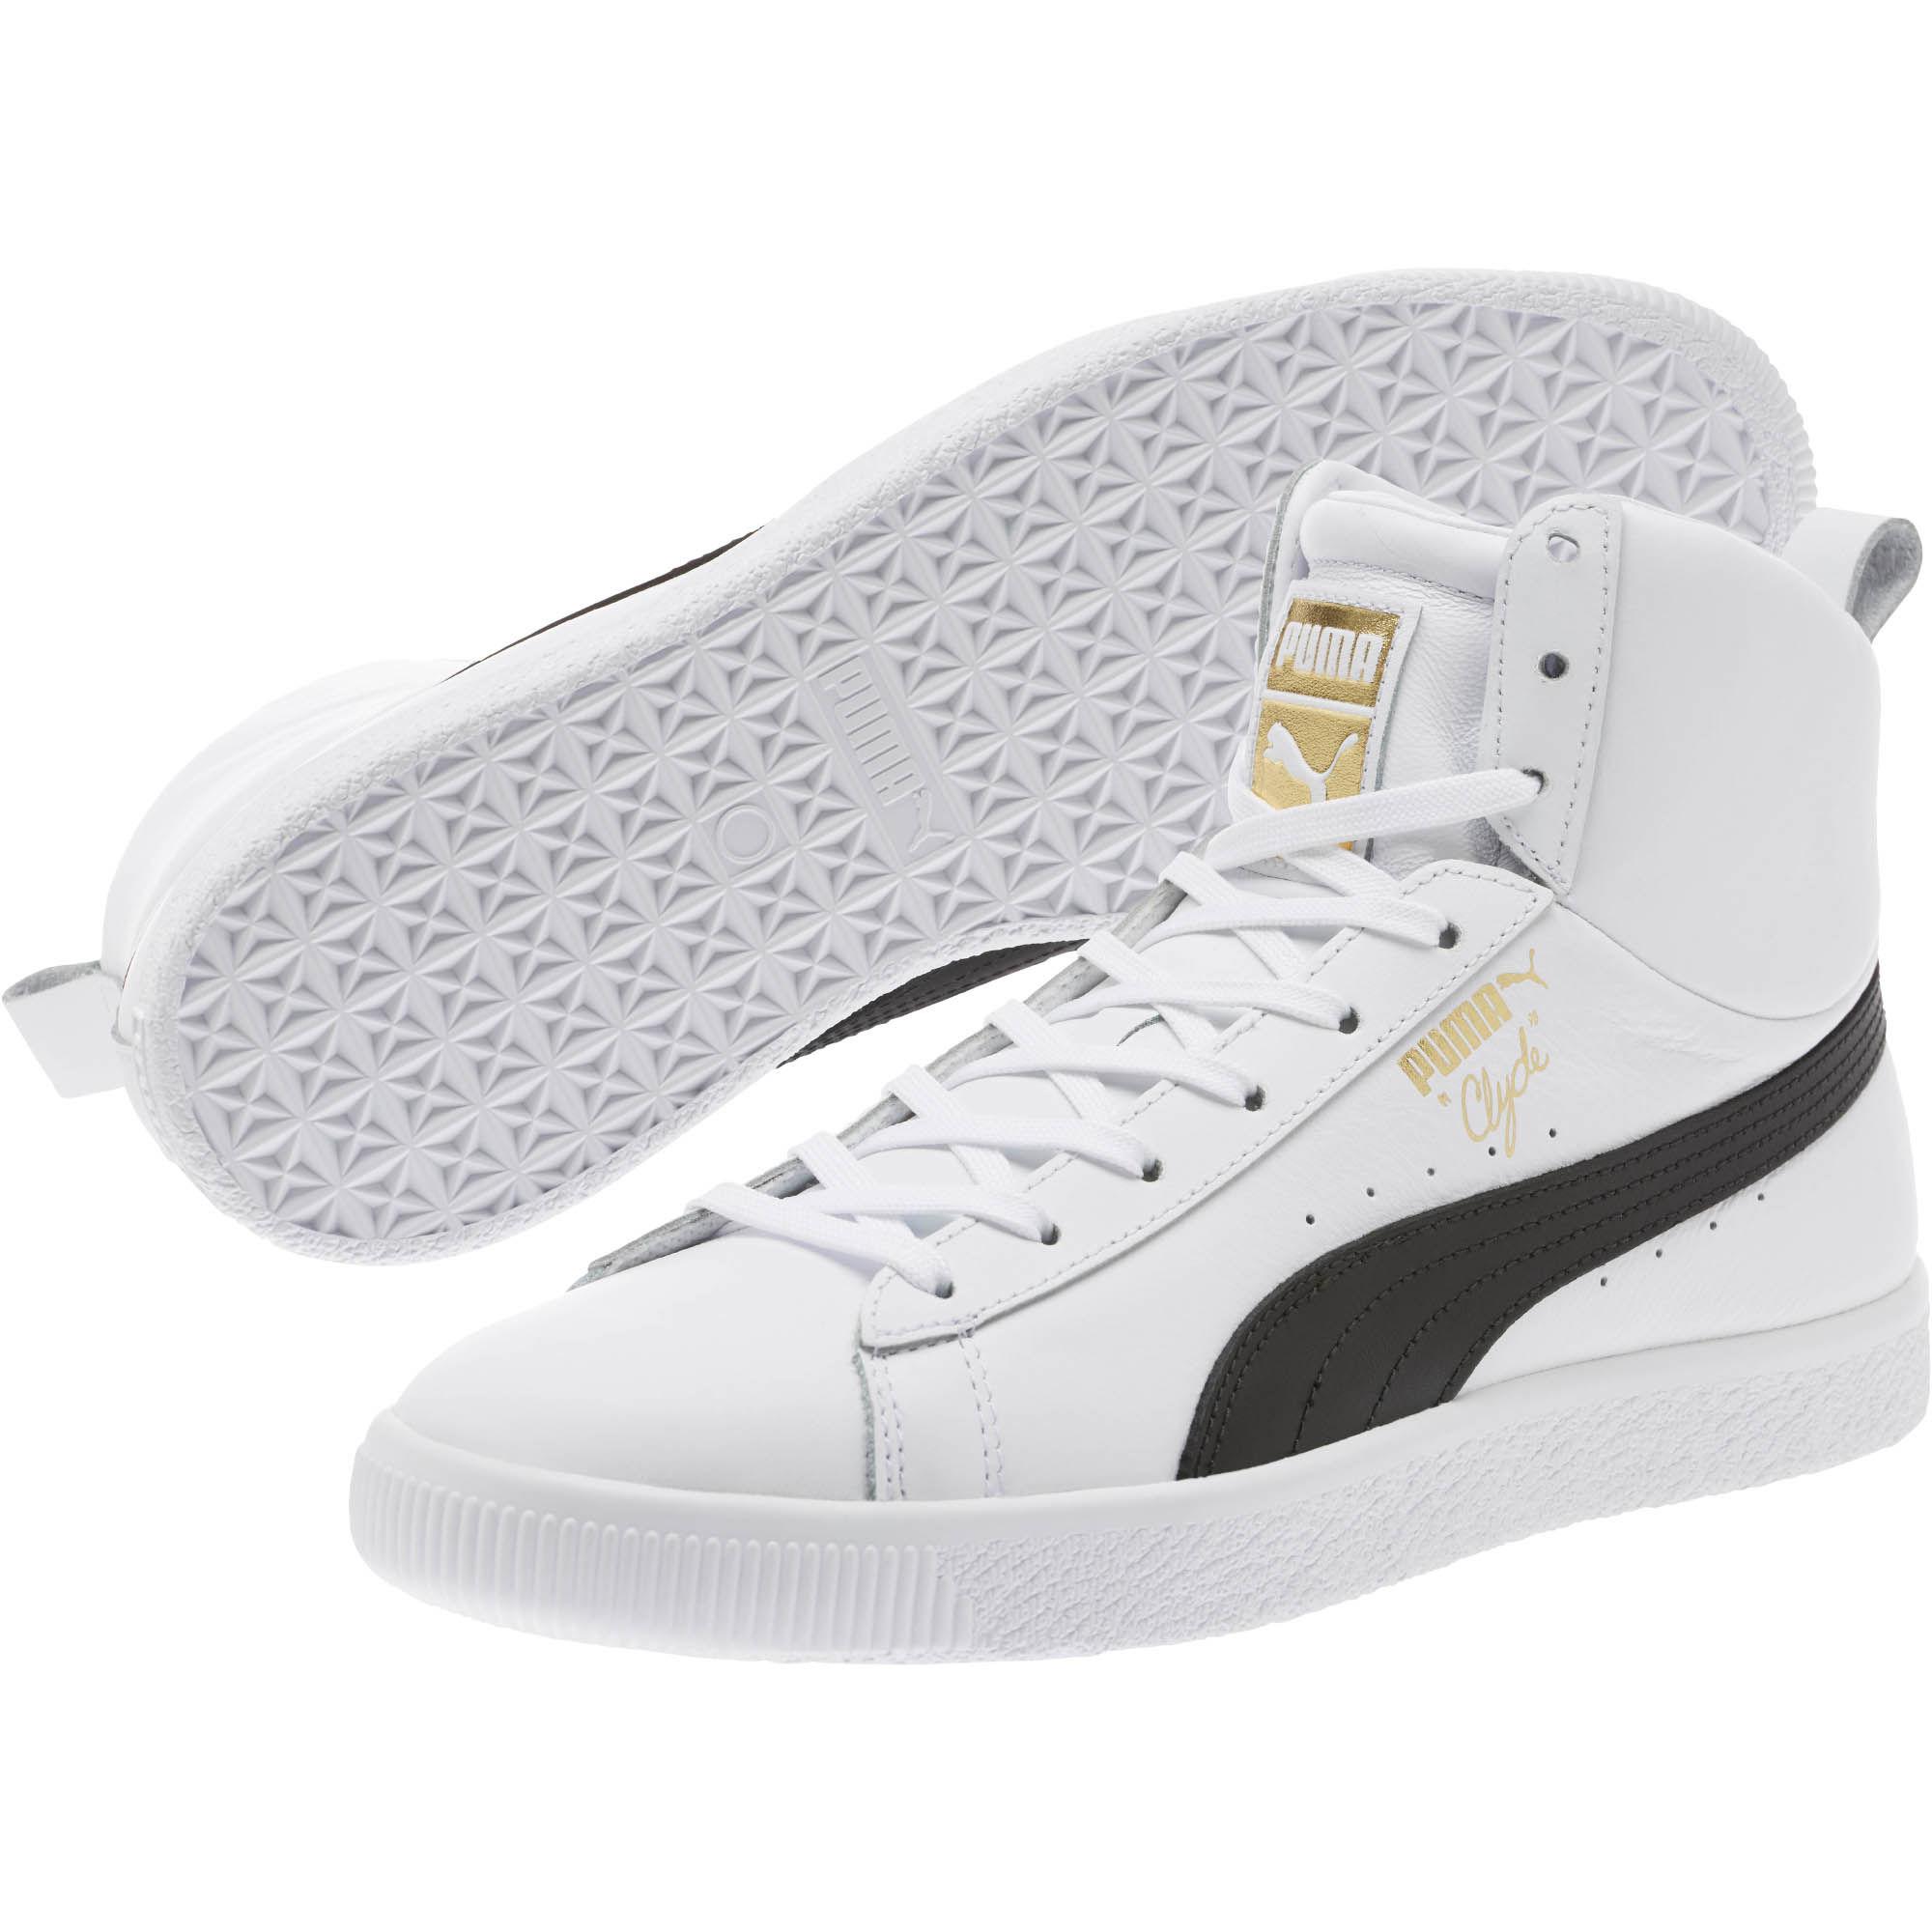 PUMA Leather Clyde Core Mid Sneakers in White for Men - Lyst